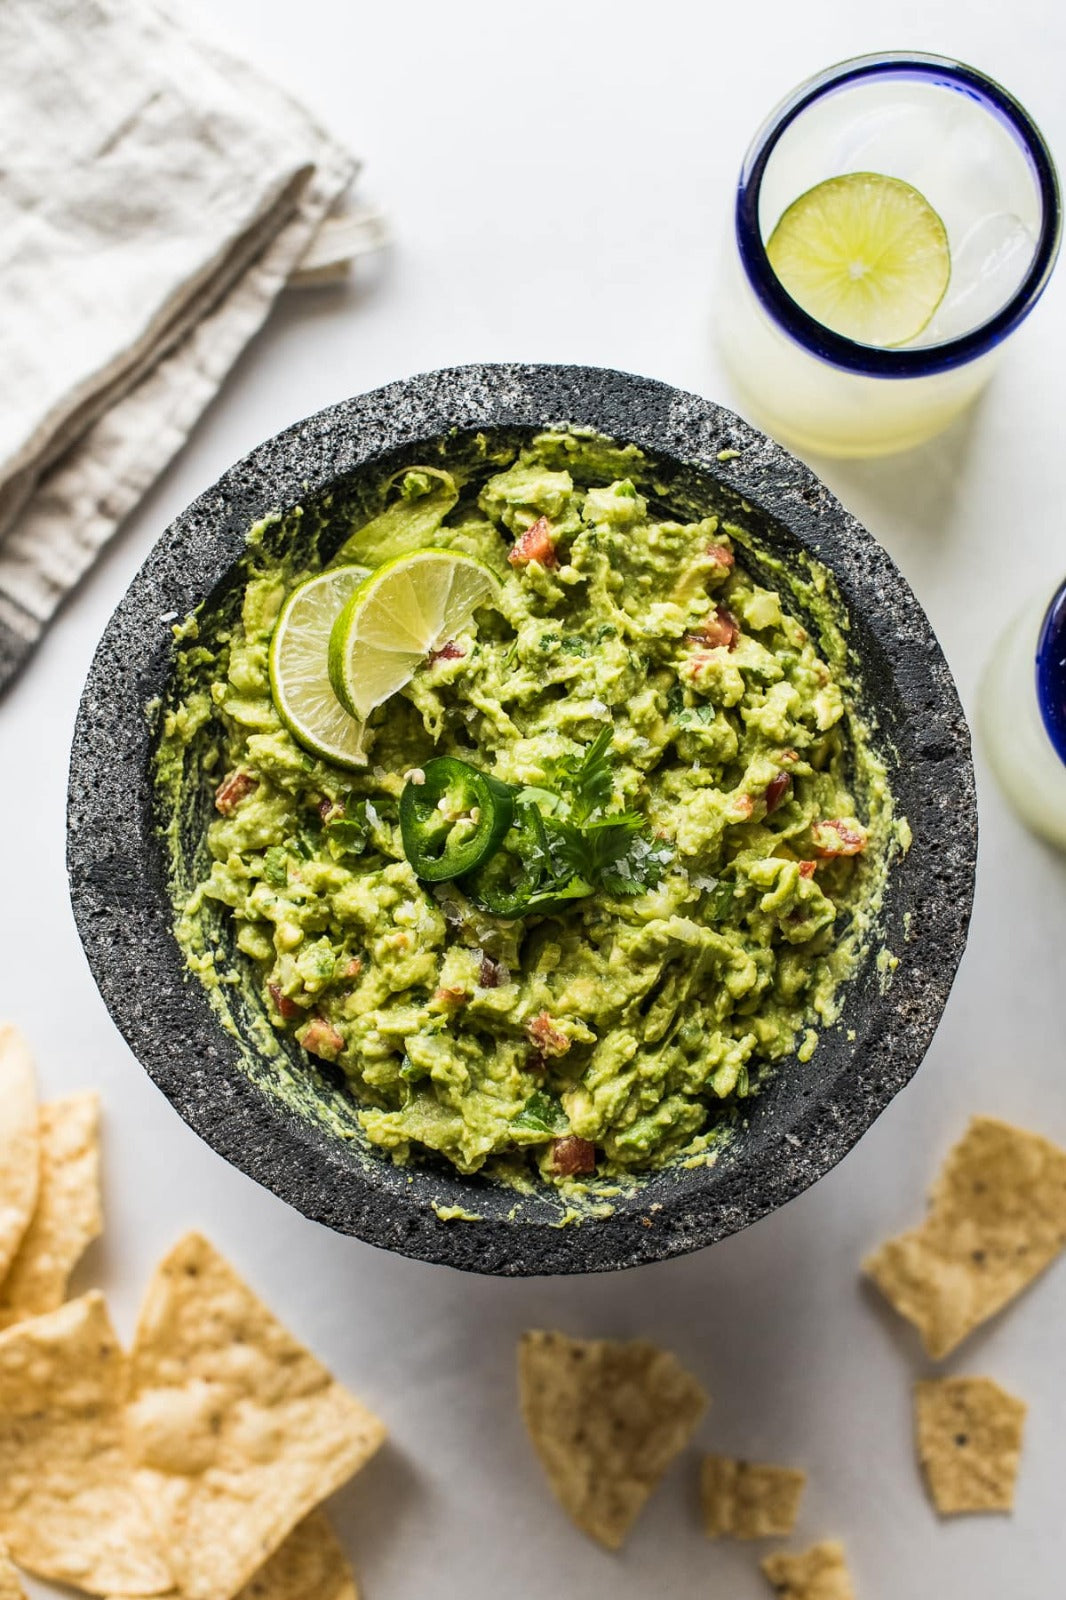 Tips for making the best guacamole